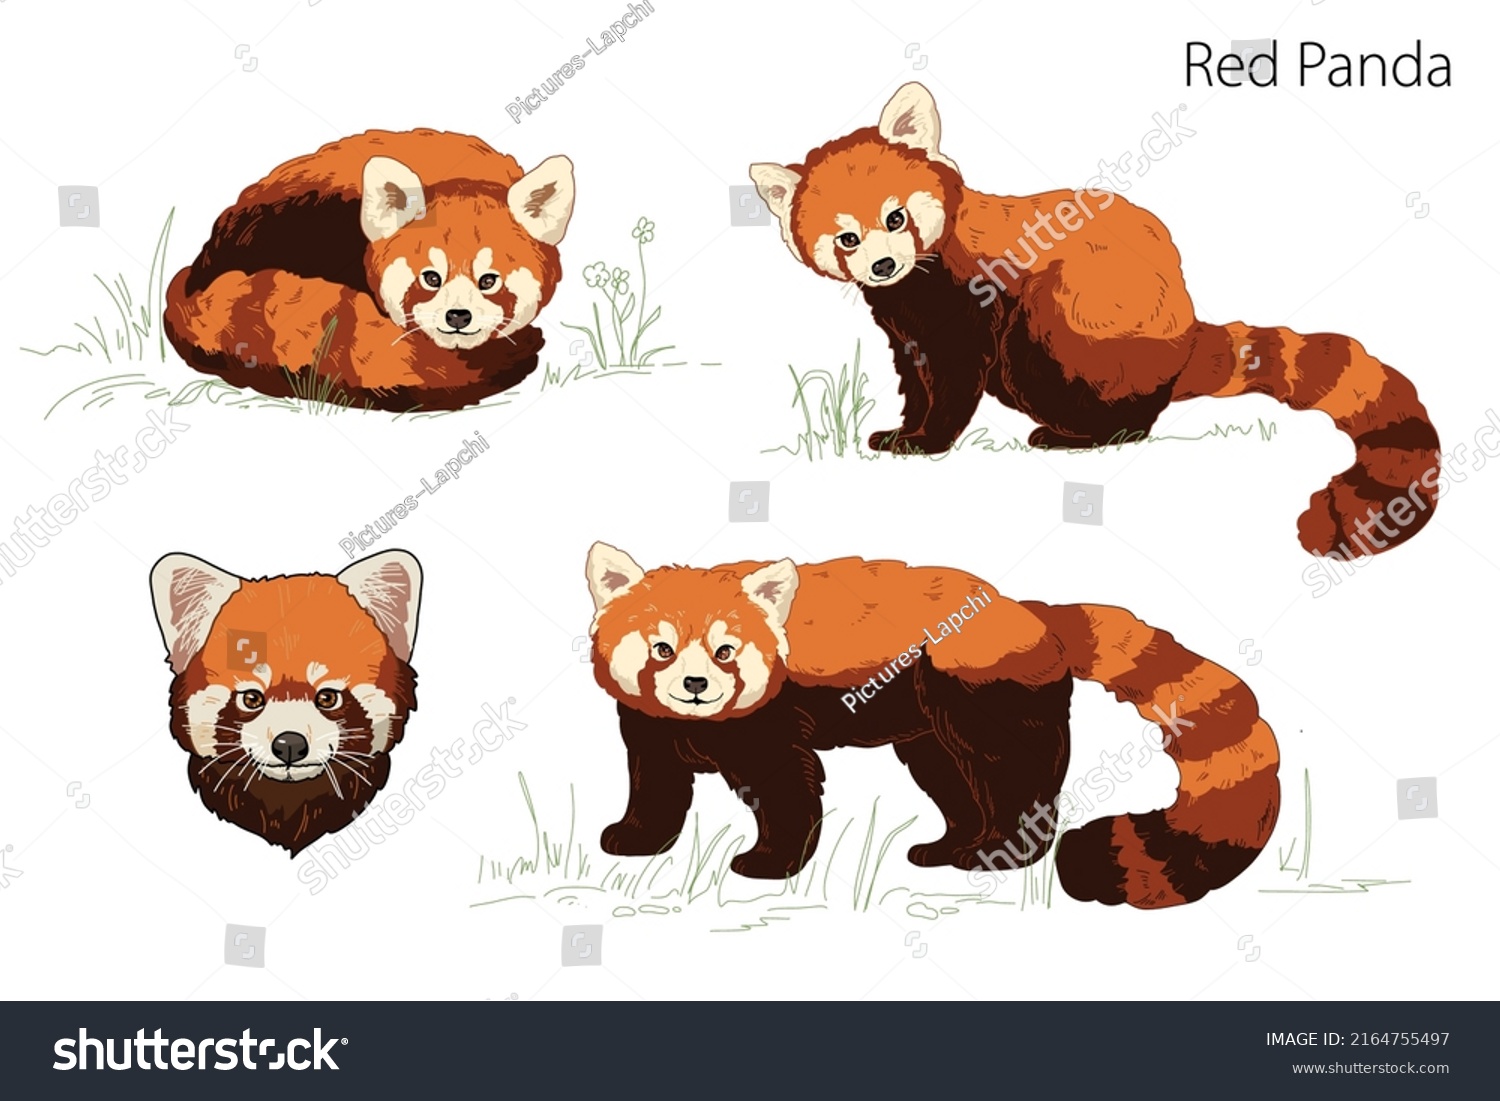 SVG of Cute adorable red panda is lying? standing, sitting, panda head cartoon animal character design flat illustration in vector style on white background Vector svg